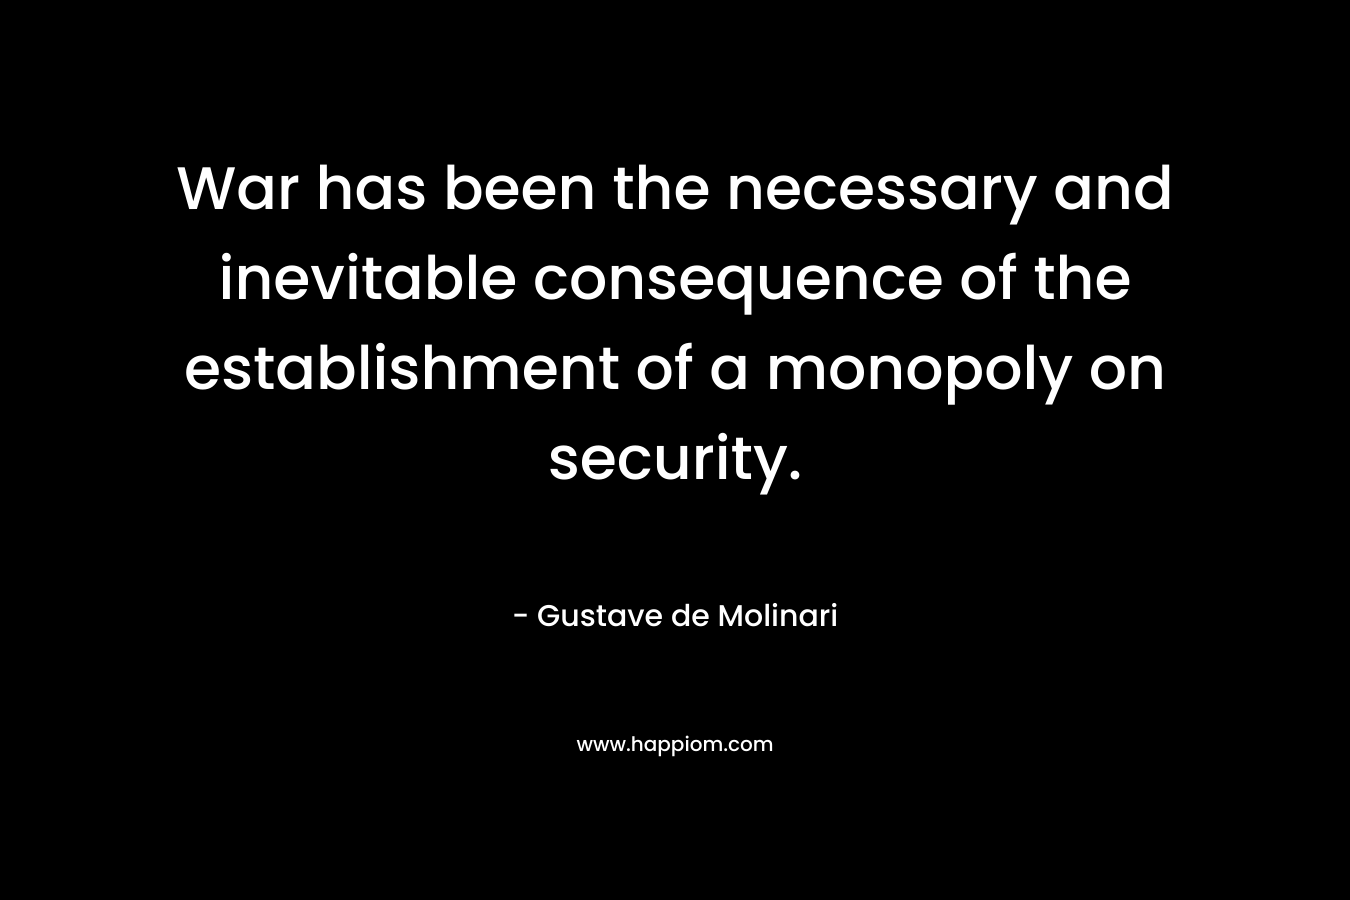 War has been the necessary and inevitable consequence of the establishment of a monopoly on security. – Gustave de Molinari